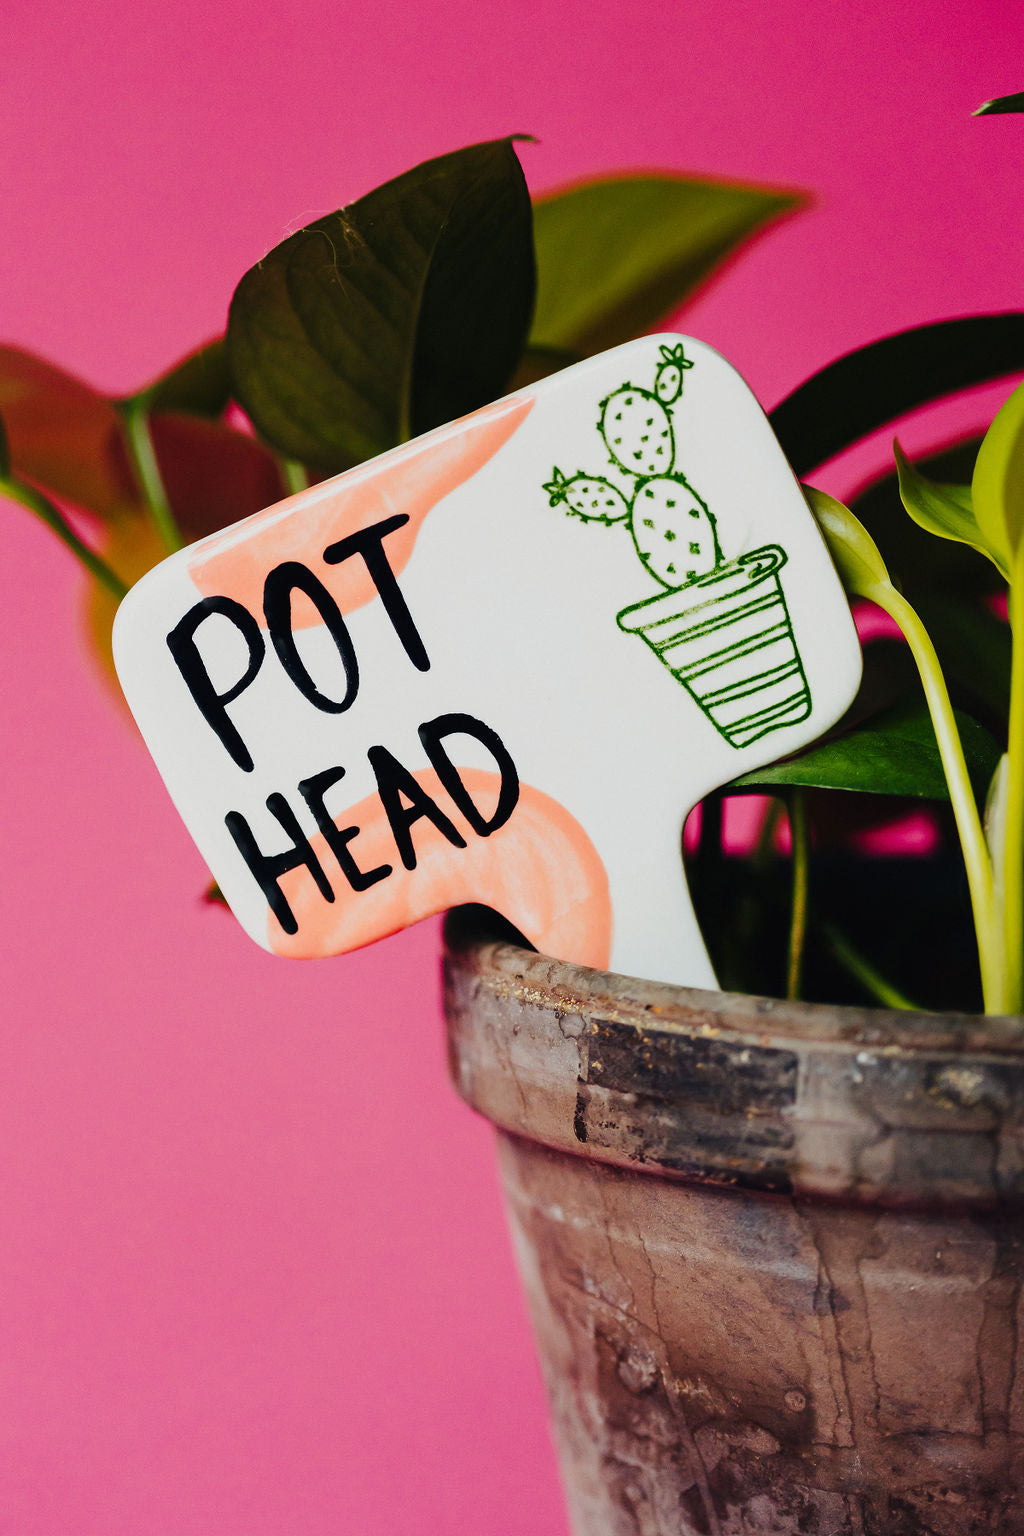 Pot Head Funny Punny Garden Plant Stake